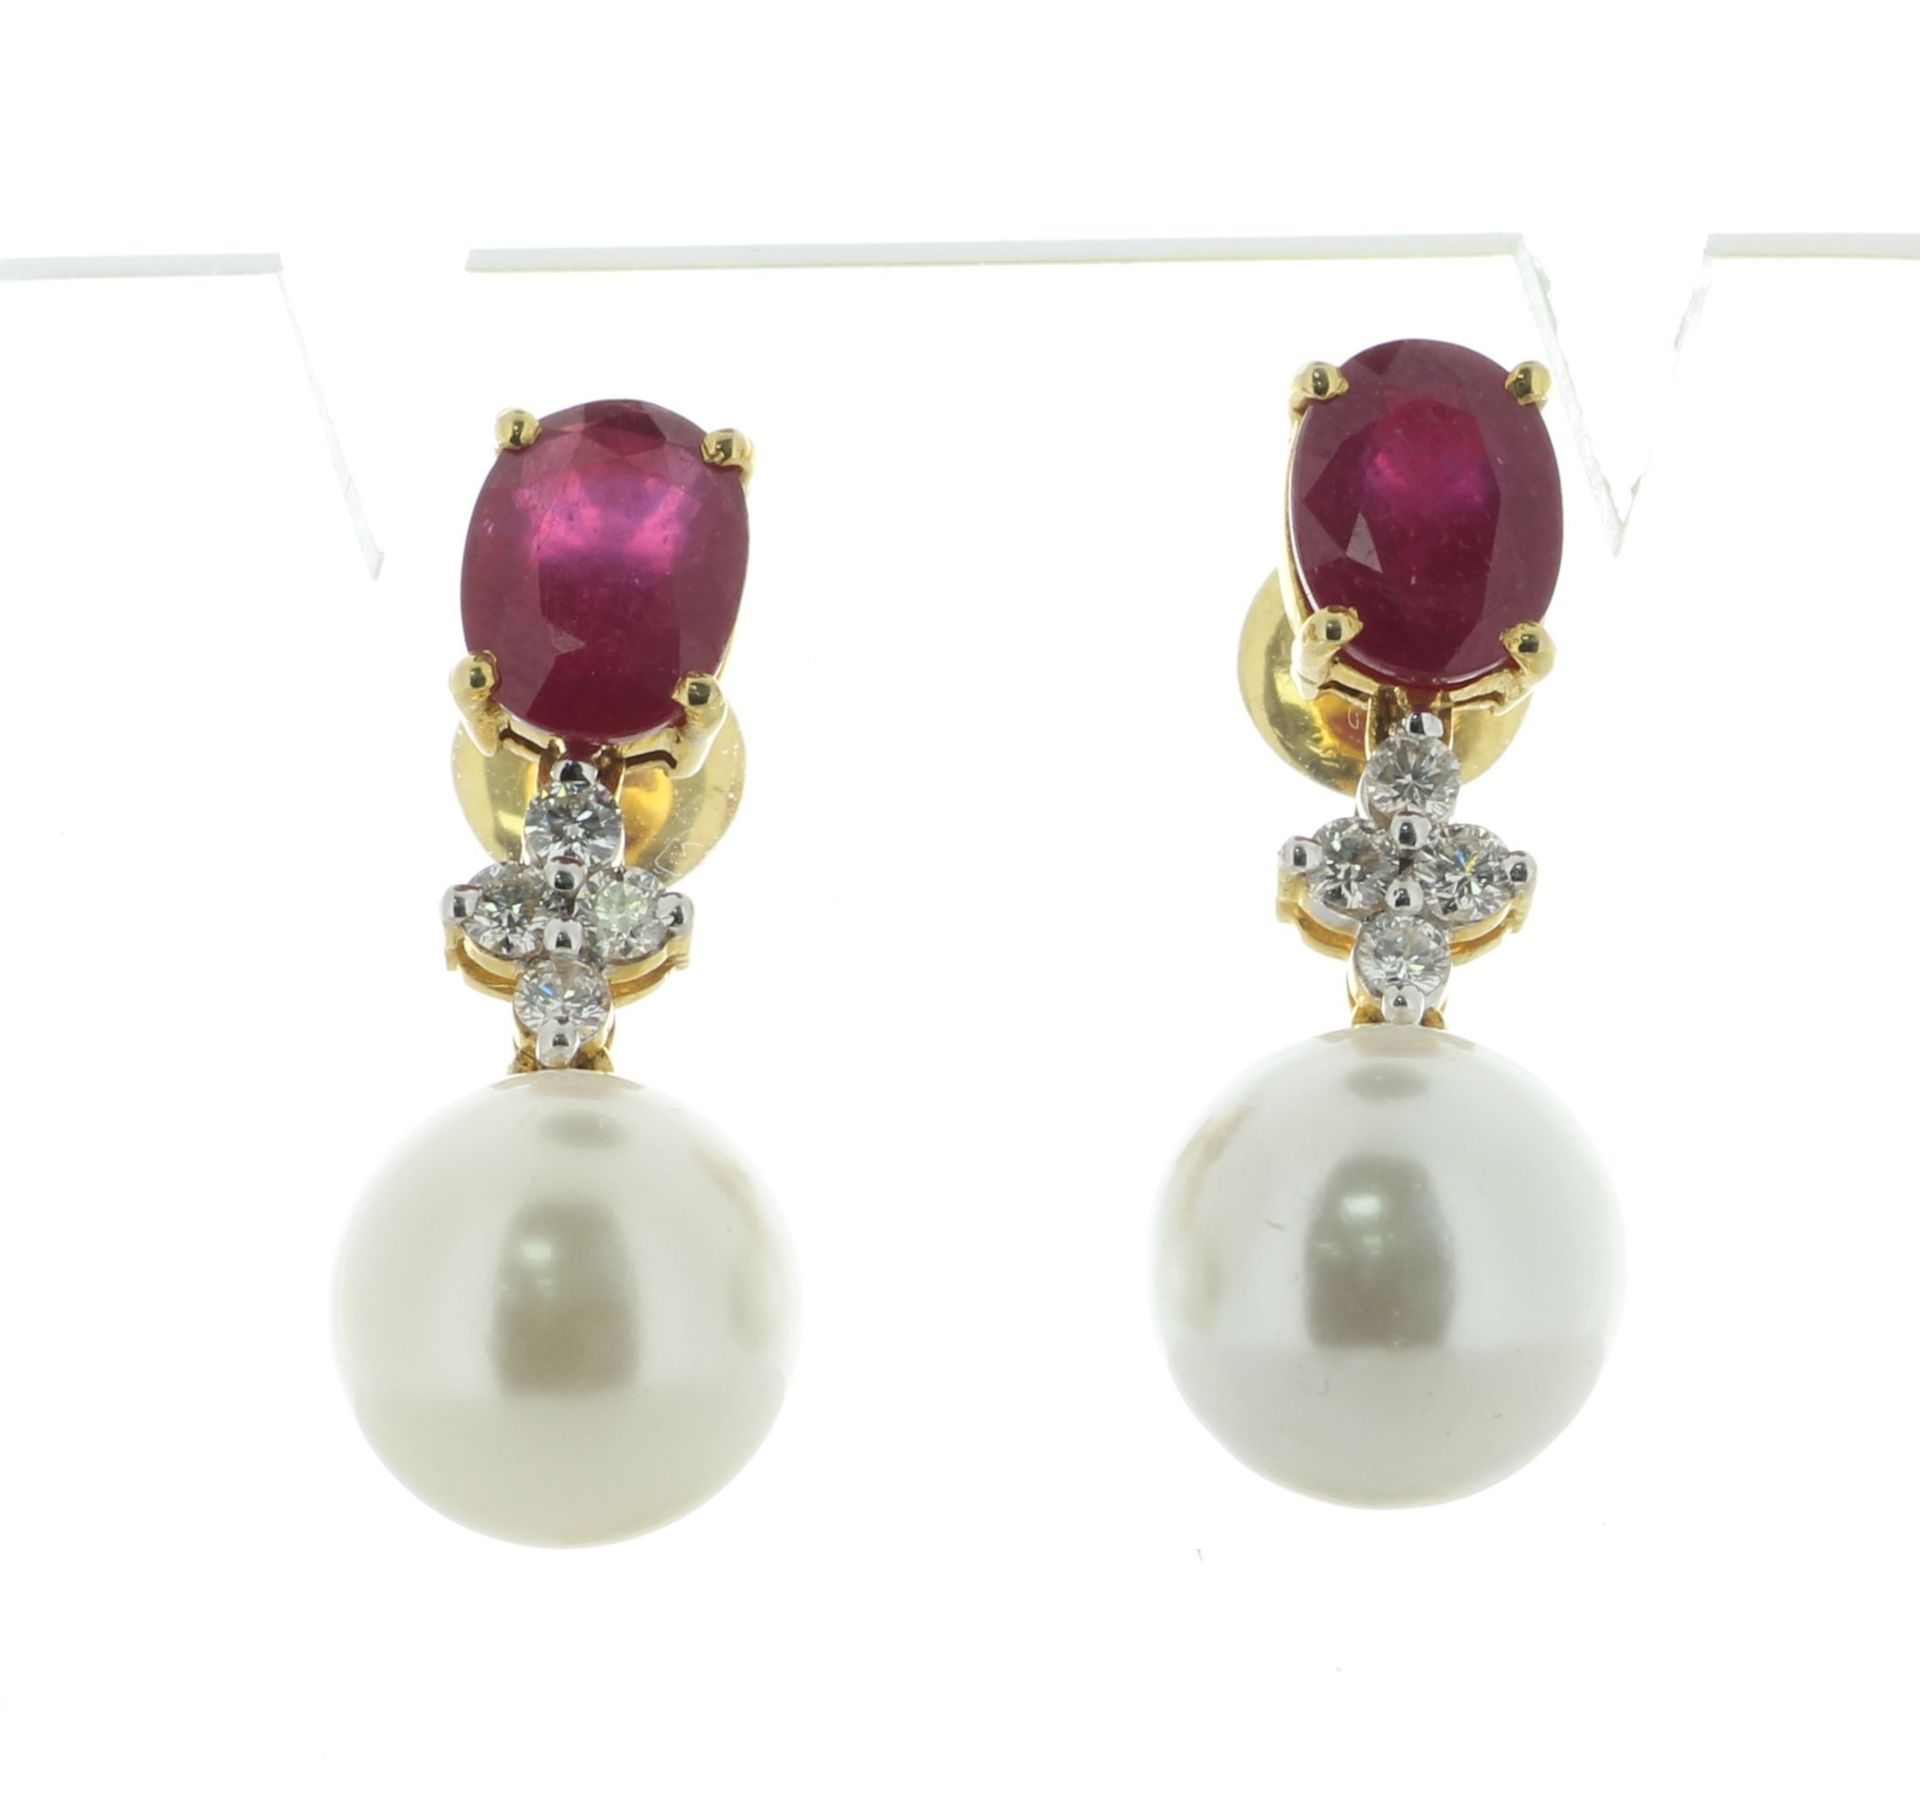 18ct White Gold Ladies Dress Diamond, Pearl And Ruby Earring (R2.40) 0.40 Carats